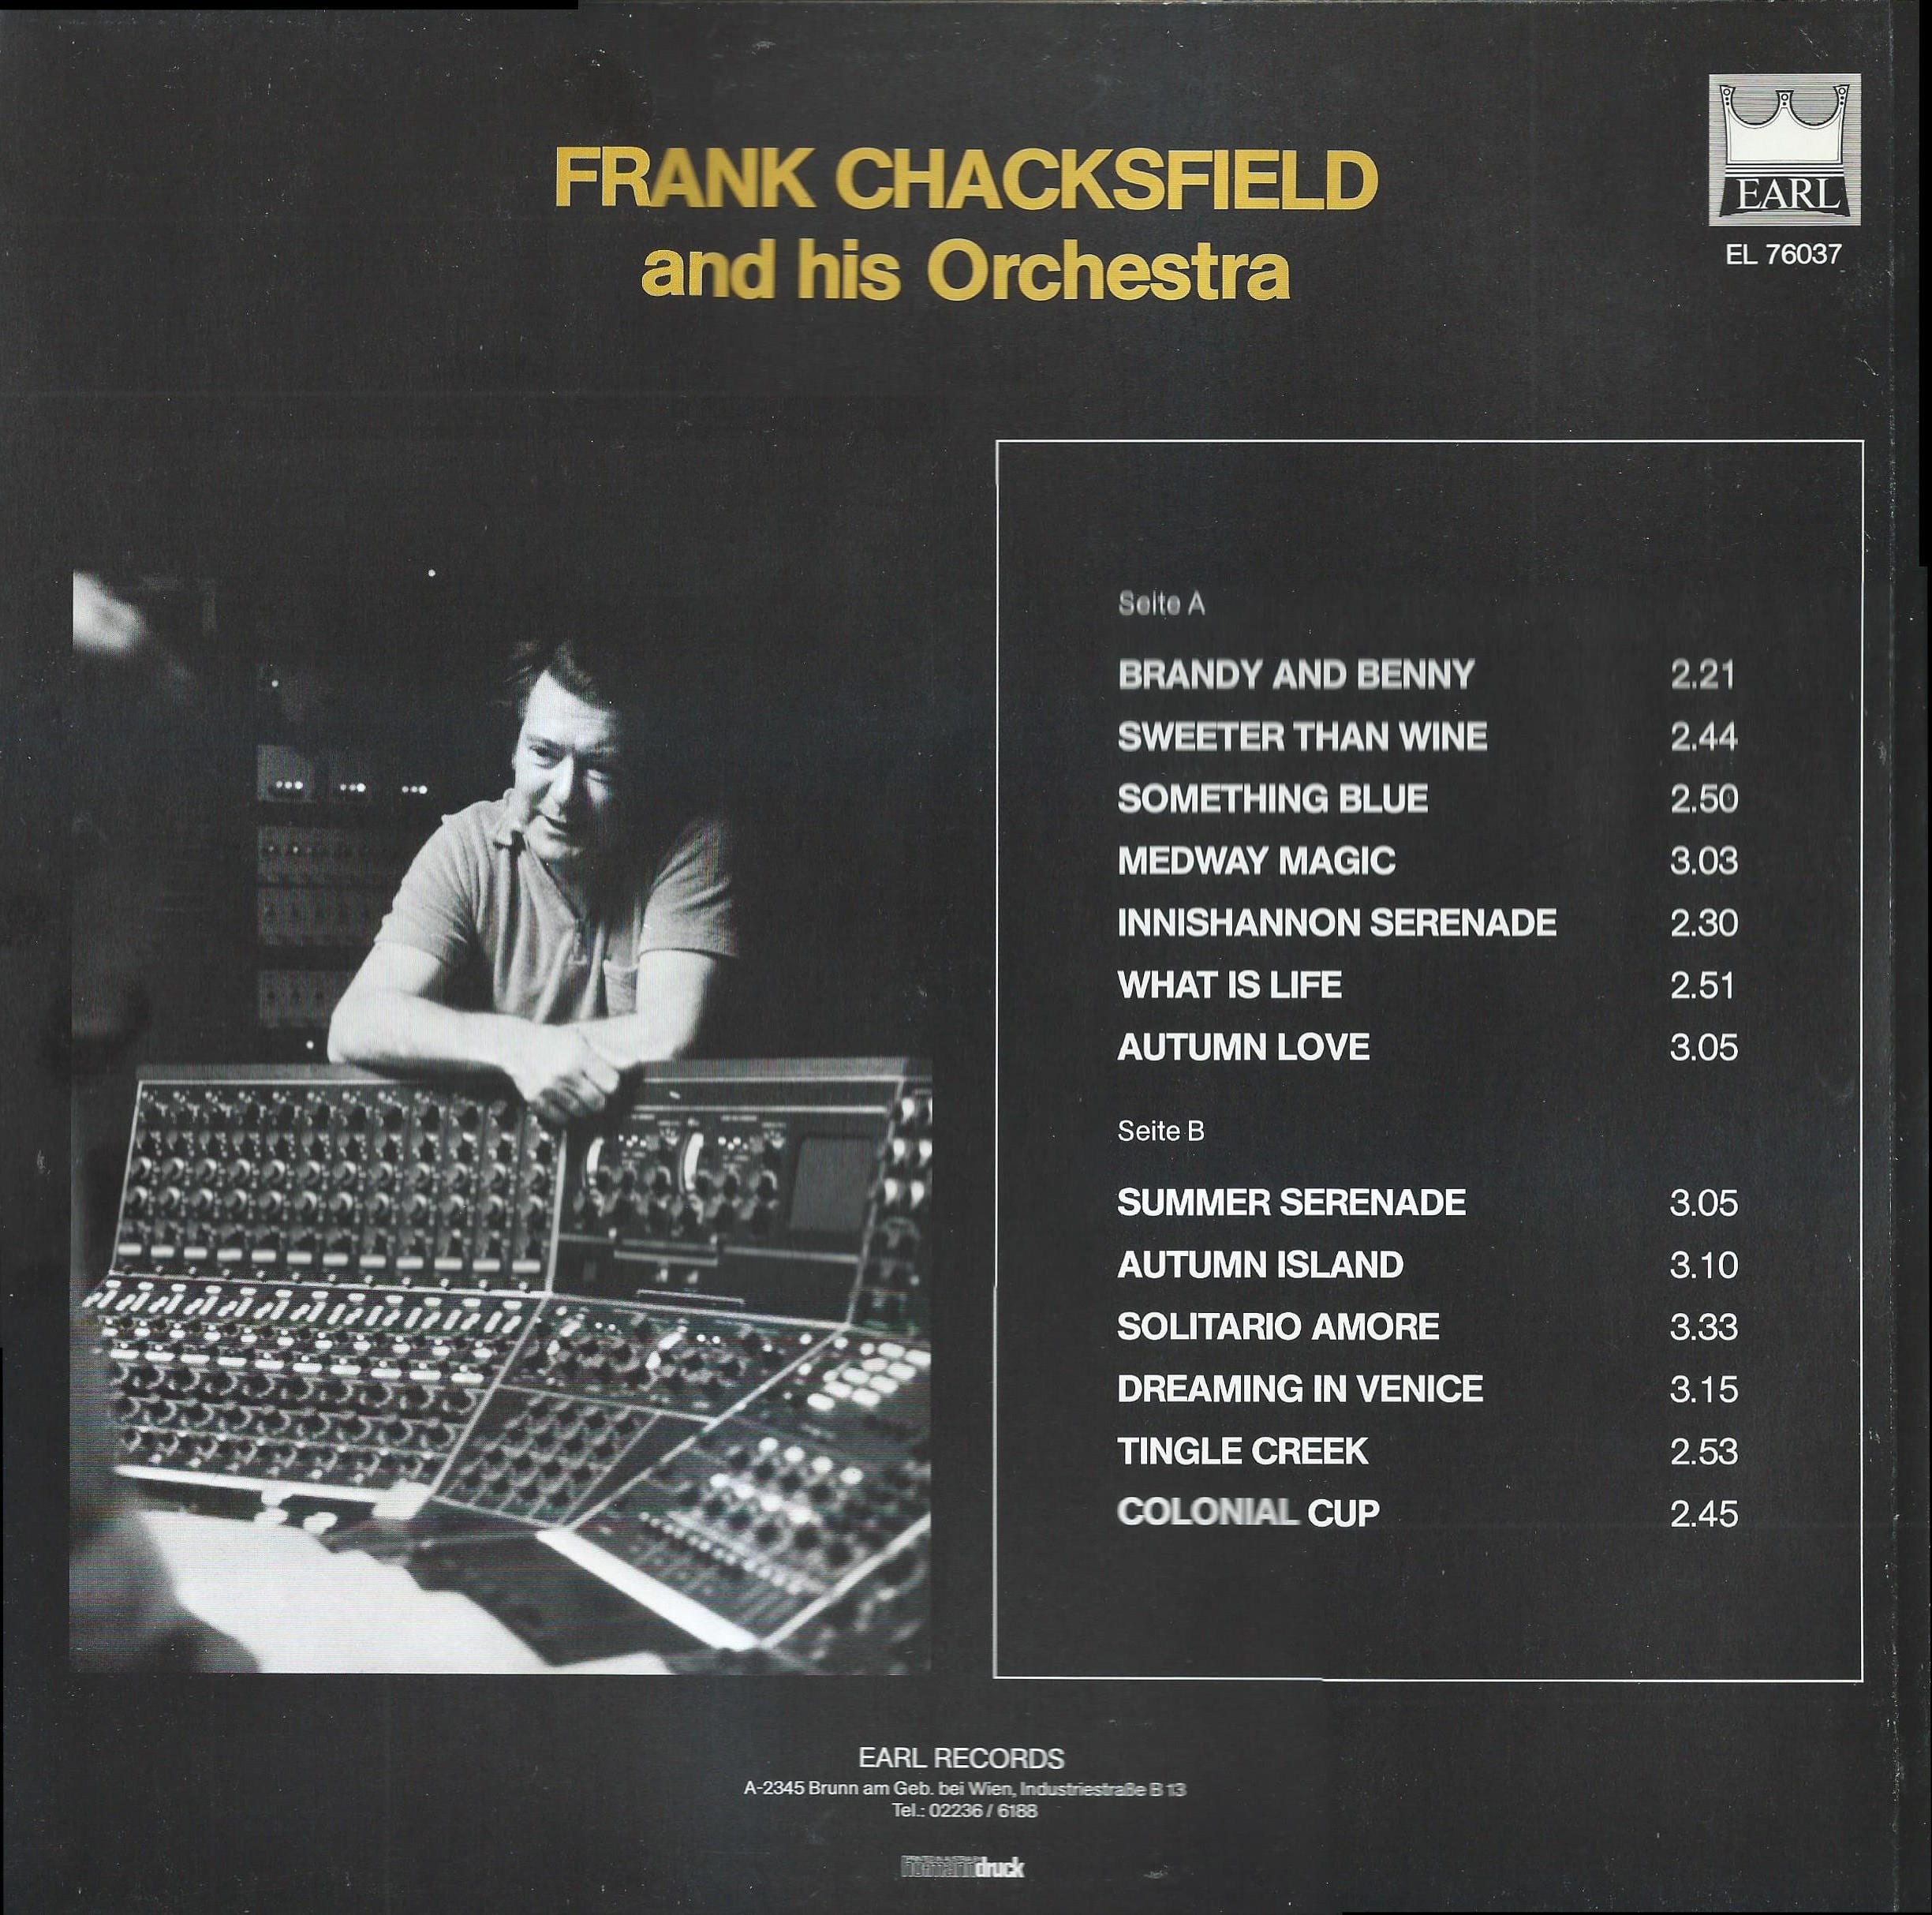 Frank Chacksfield and his Orchestra – 2